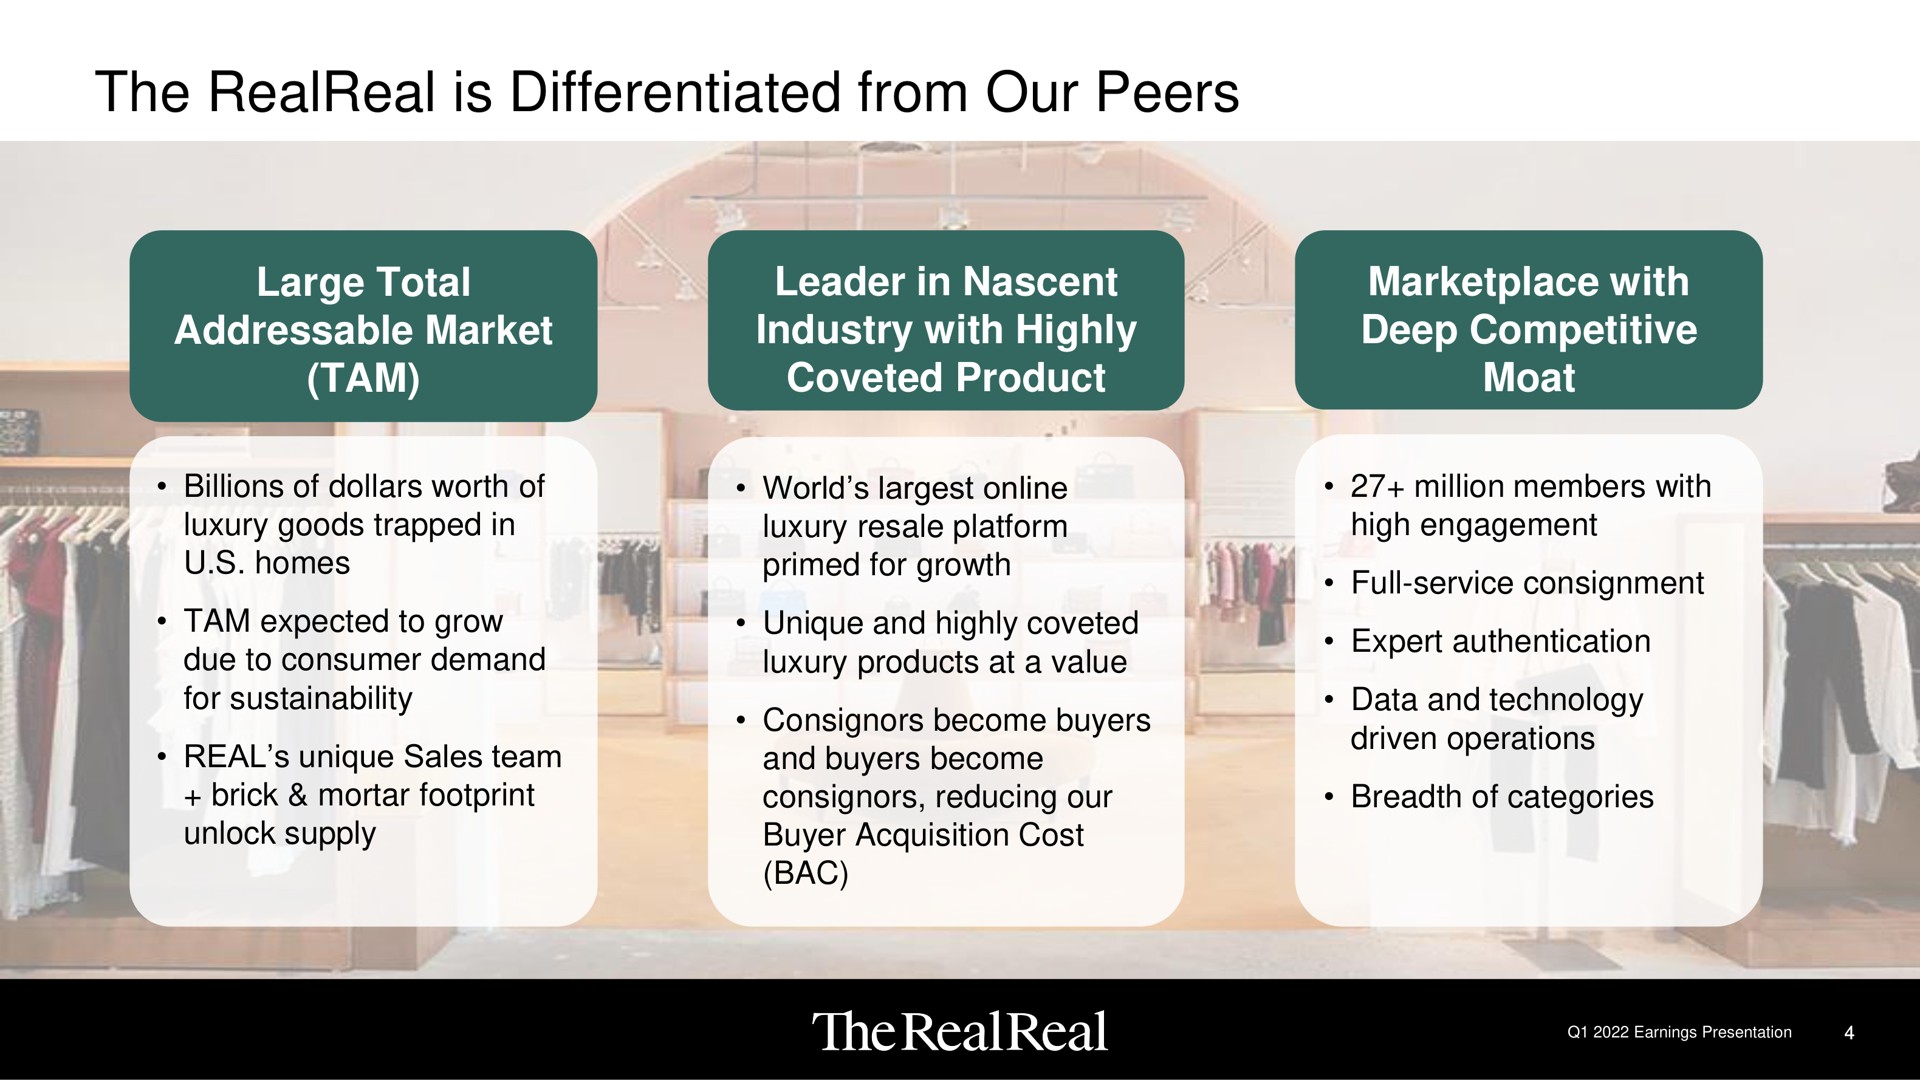 the is differentiated from our peers | The RealReal